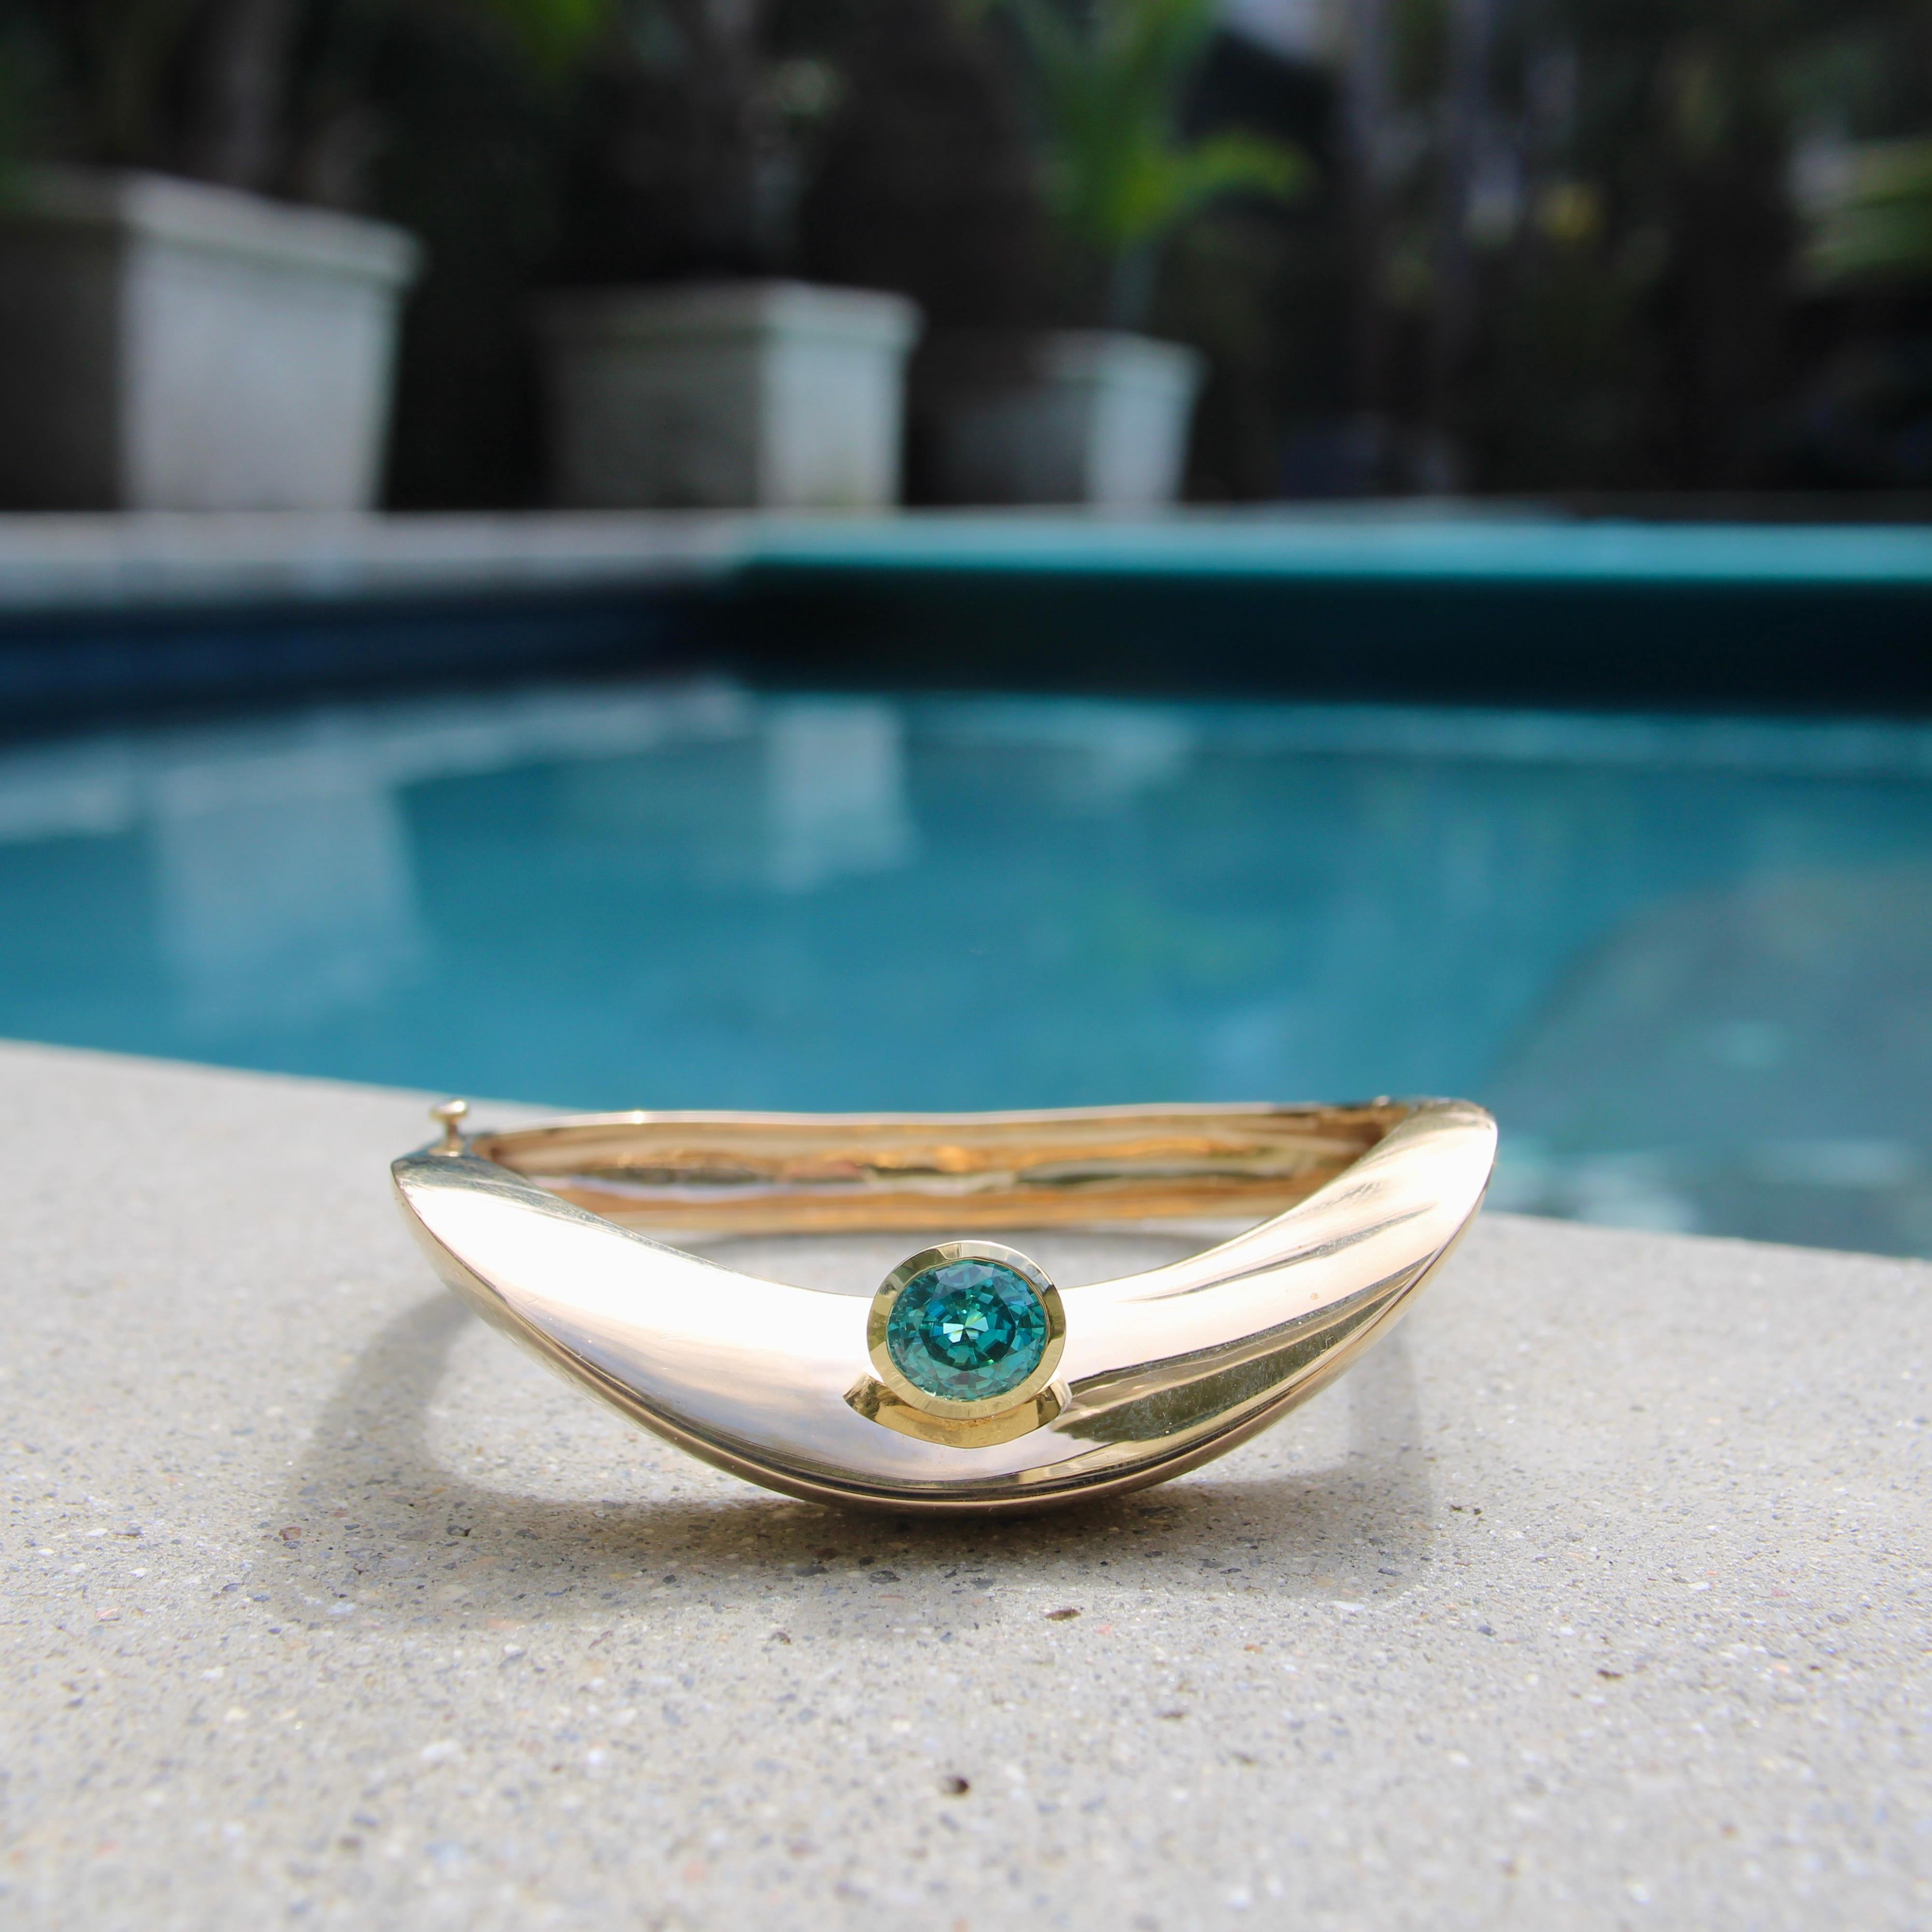 Circa the 1970’s, this 14k gold modern bracelet has a wave-like shape with a knife edge along the top side. The swoop of the knife edge makes the eye follow the piece to a bezel set blue zircon nestled in the center, perfectly complimenting the